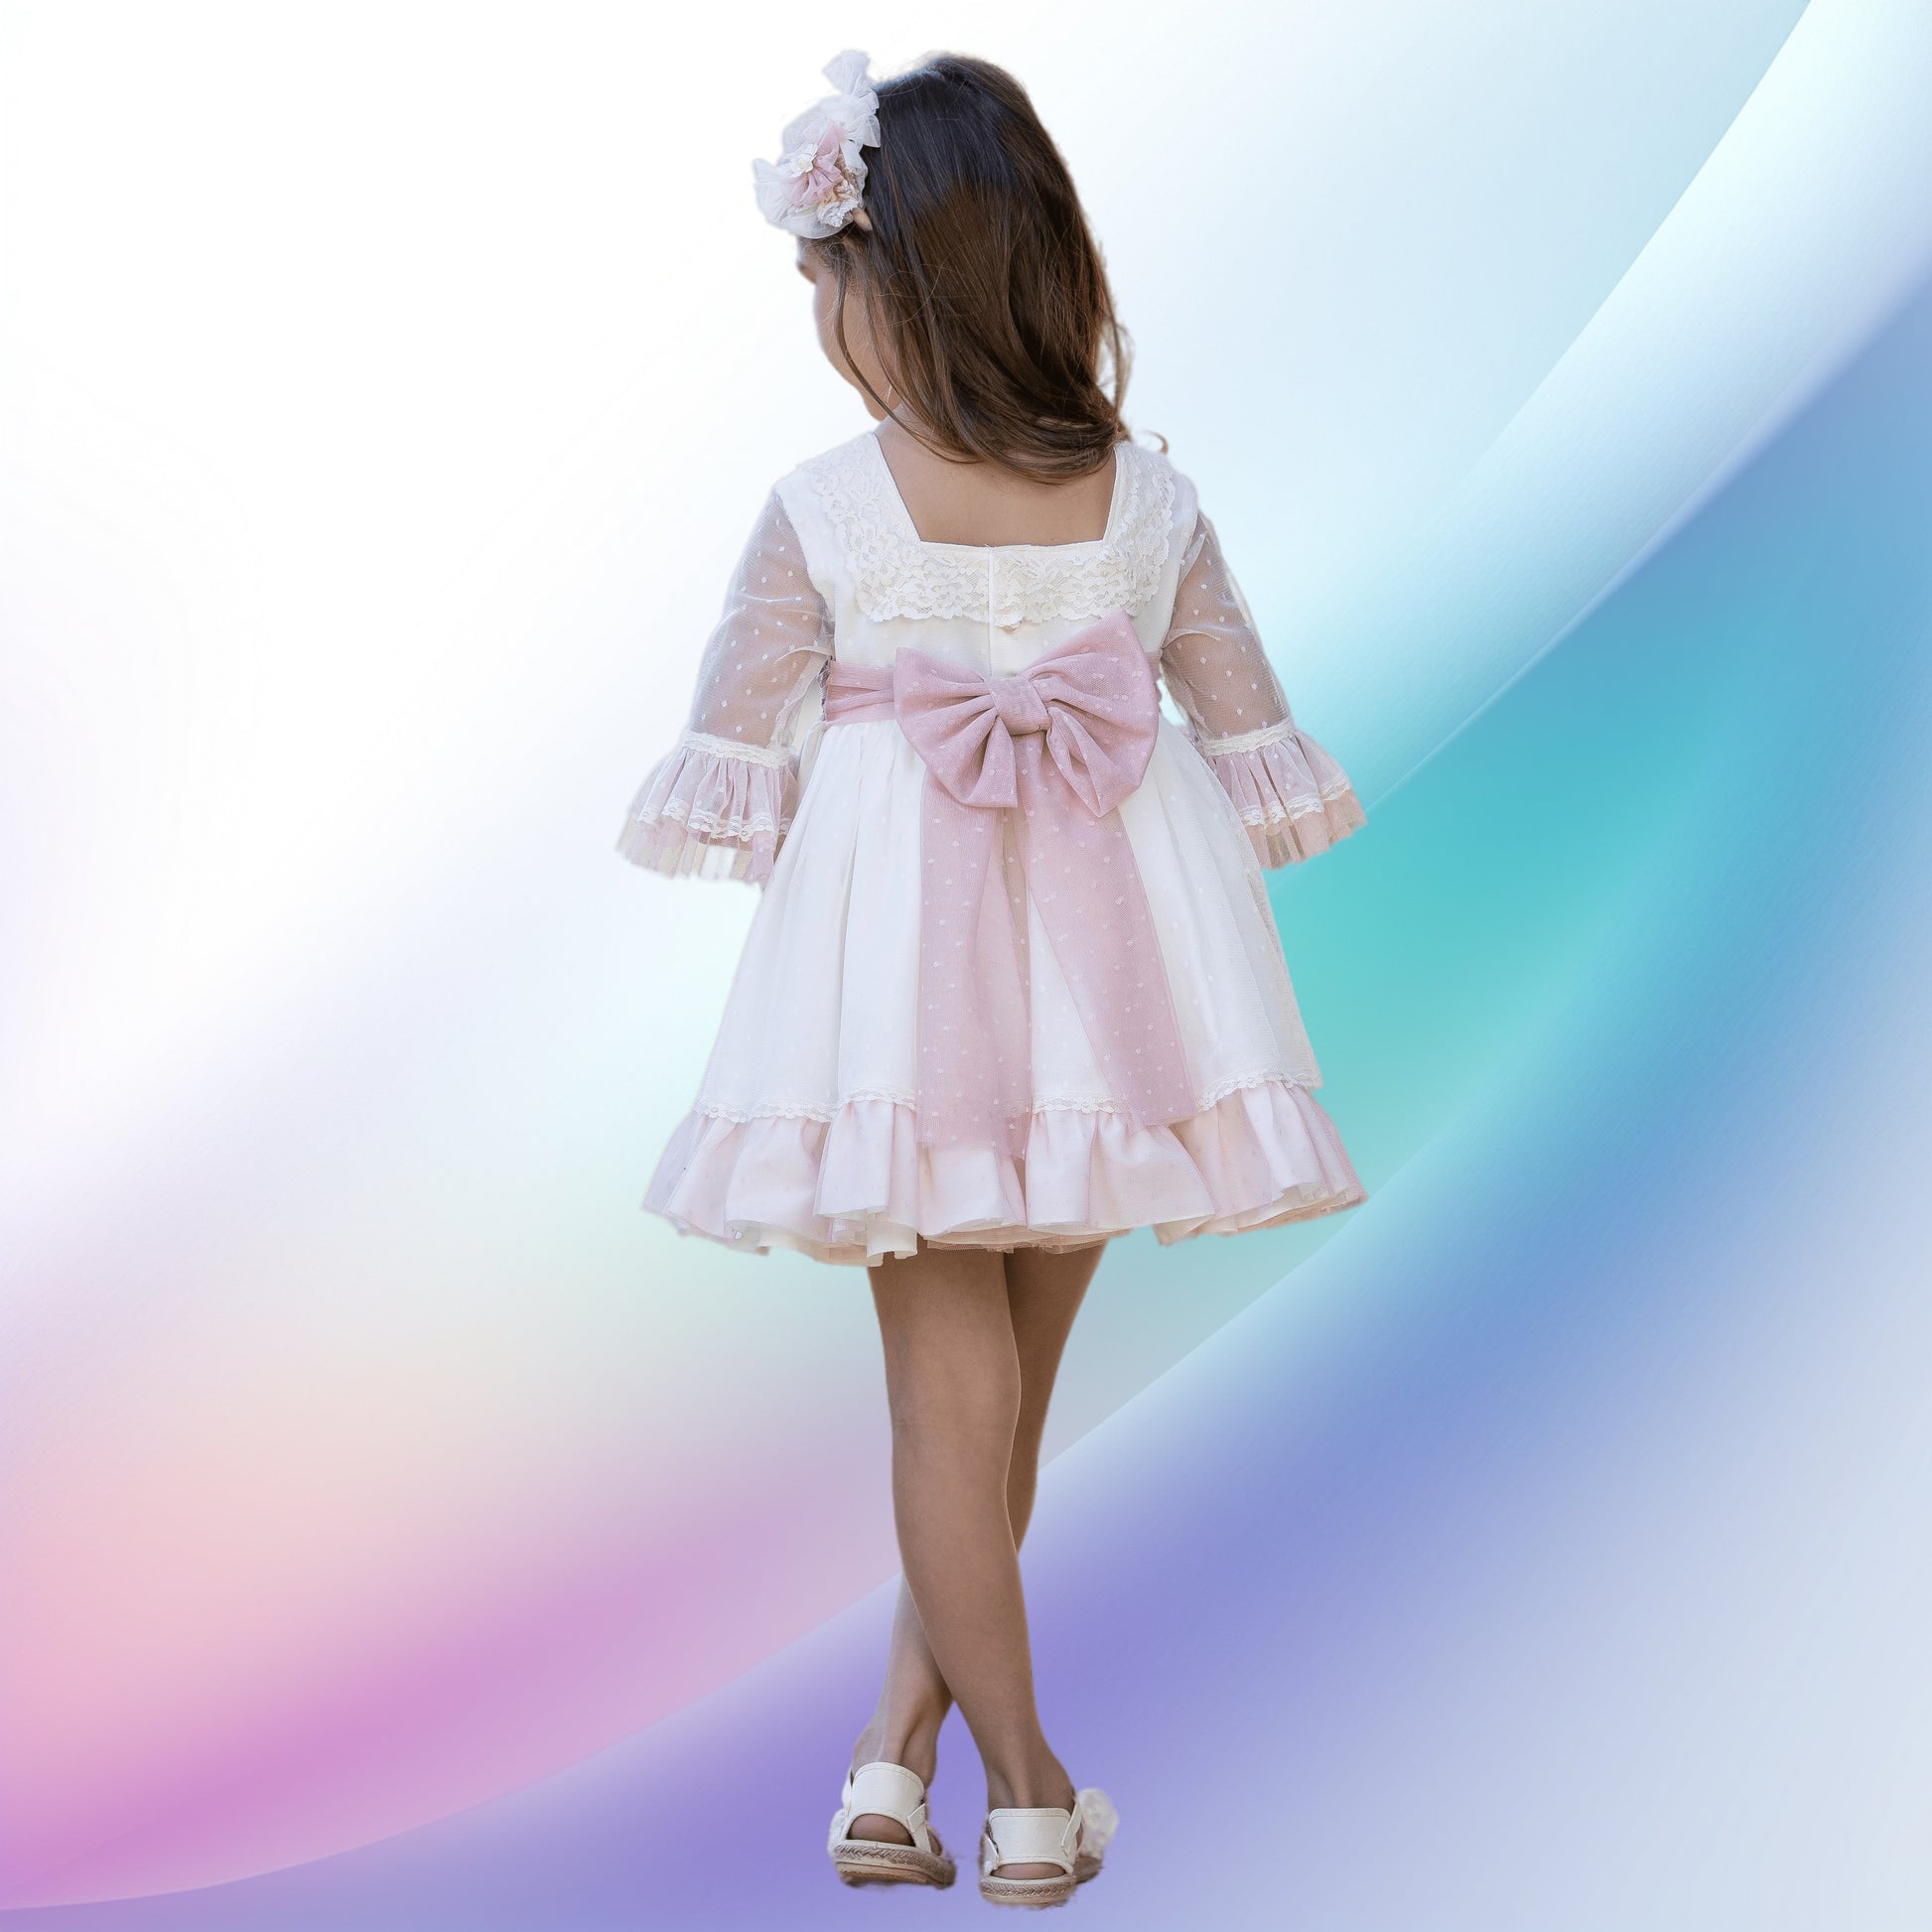 Image of an adorable off-white and pale pink girl's ceremony dress and diadem, perfect for weddings, church events, or first communions. The beautifully handcrafted dress features a lace-trimmed square neck, tulle sleeves, a multi-layered skirt with pink tulle, and a back bow. A matching flower-adorned headband completes this charming flower girl outfit.